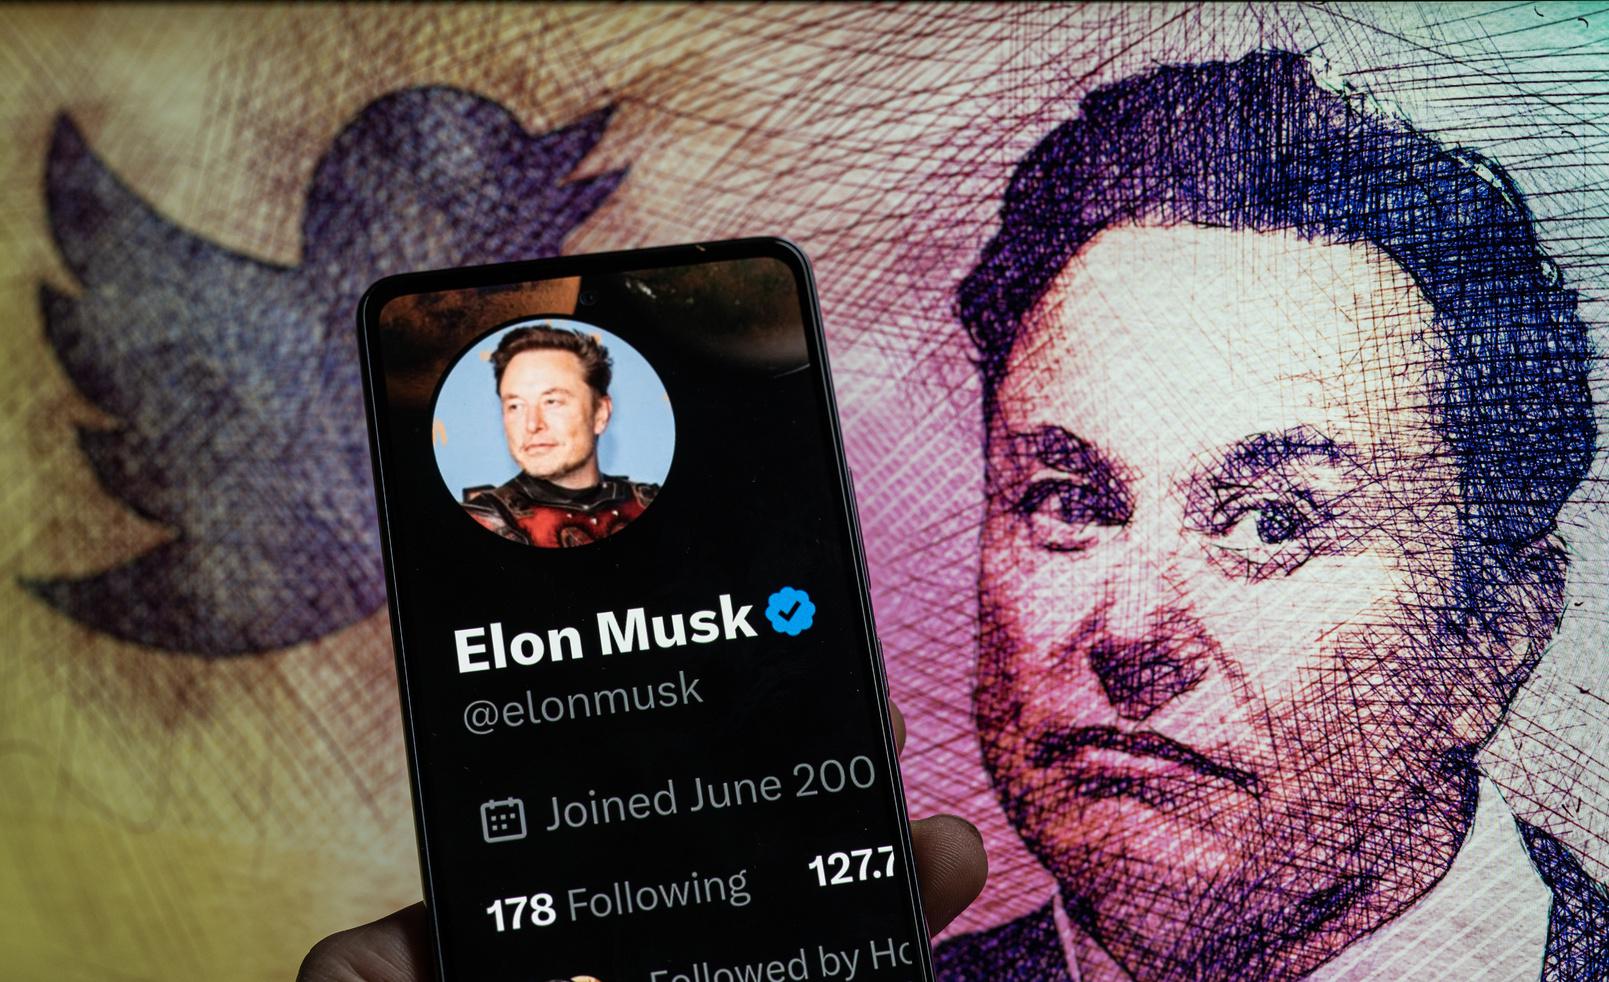 Elon Musk Says U.S. Govt 'Had Full Access' To Private Twitter DMs